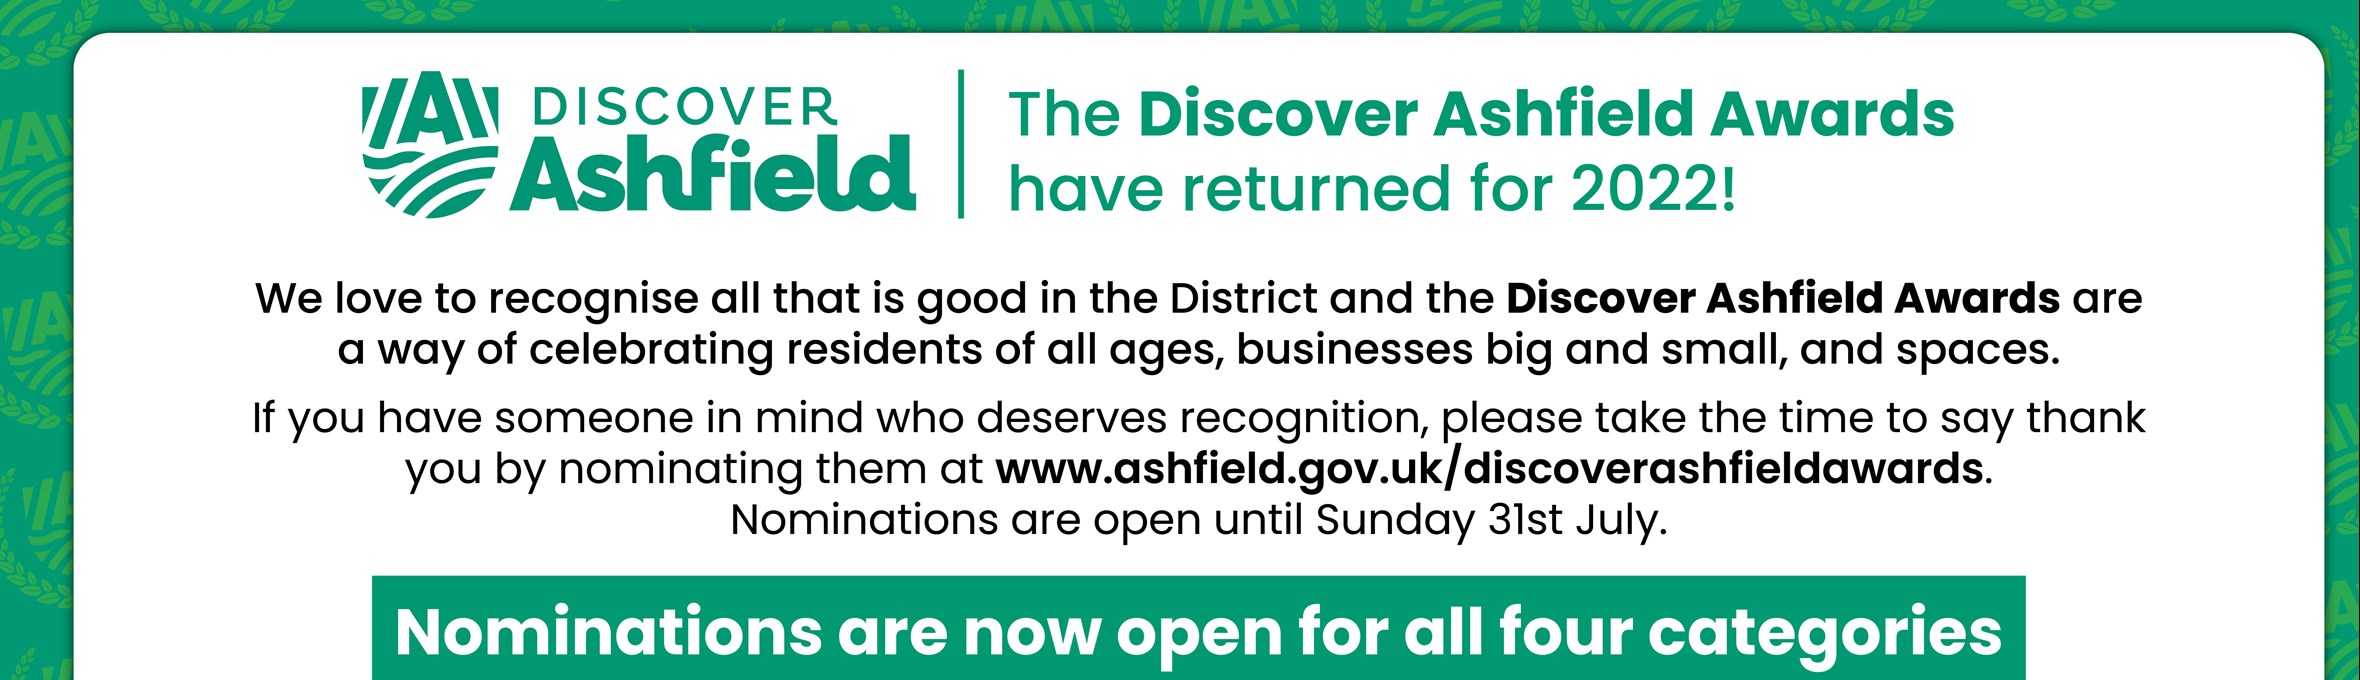 Discover Ashfield awards nominations information, including categories.